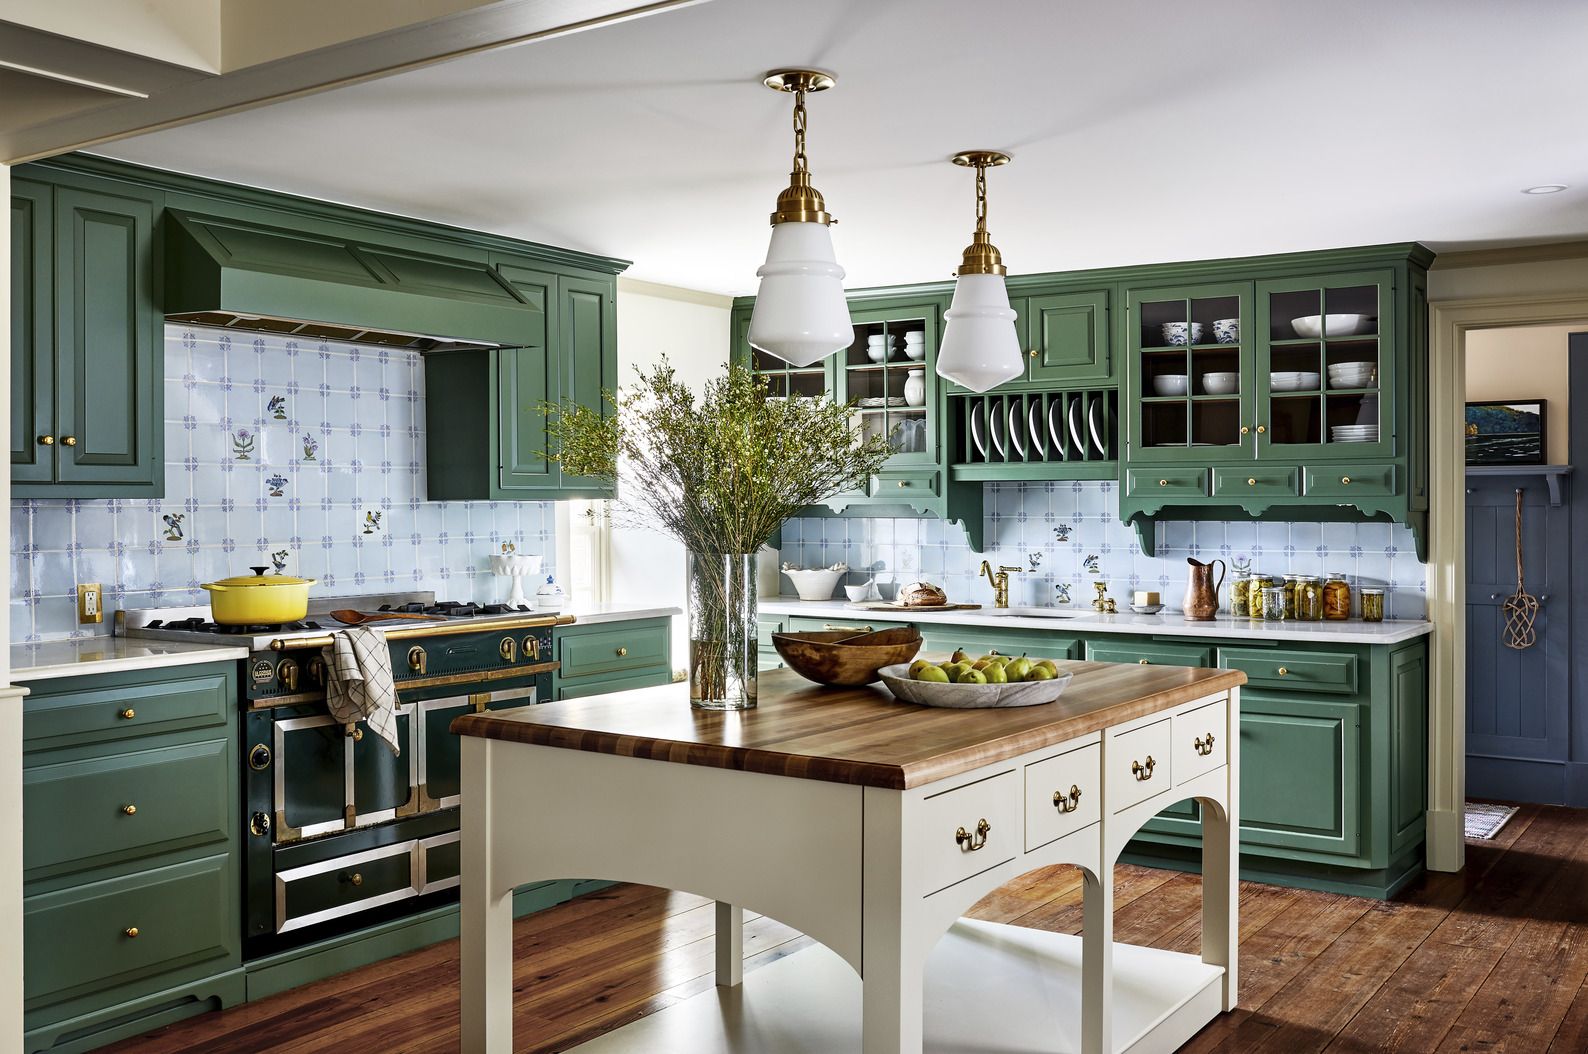 What Color Countertops Go With Green Cabinets